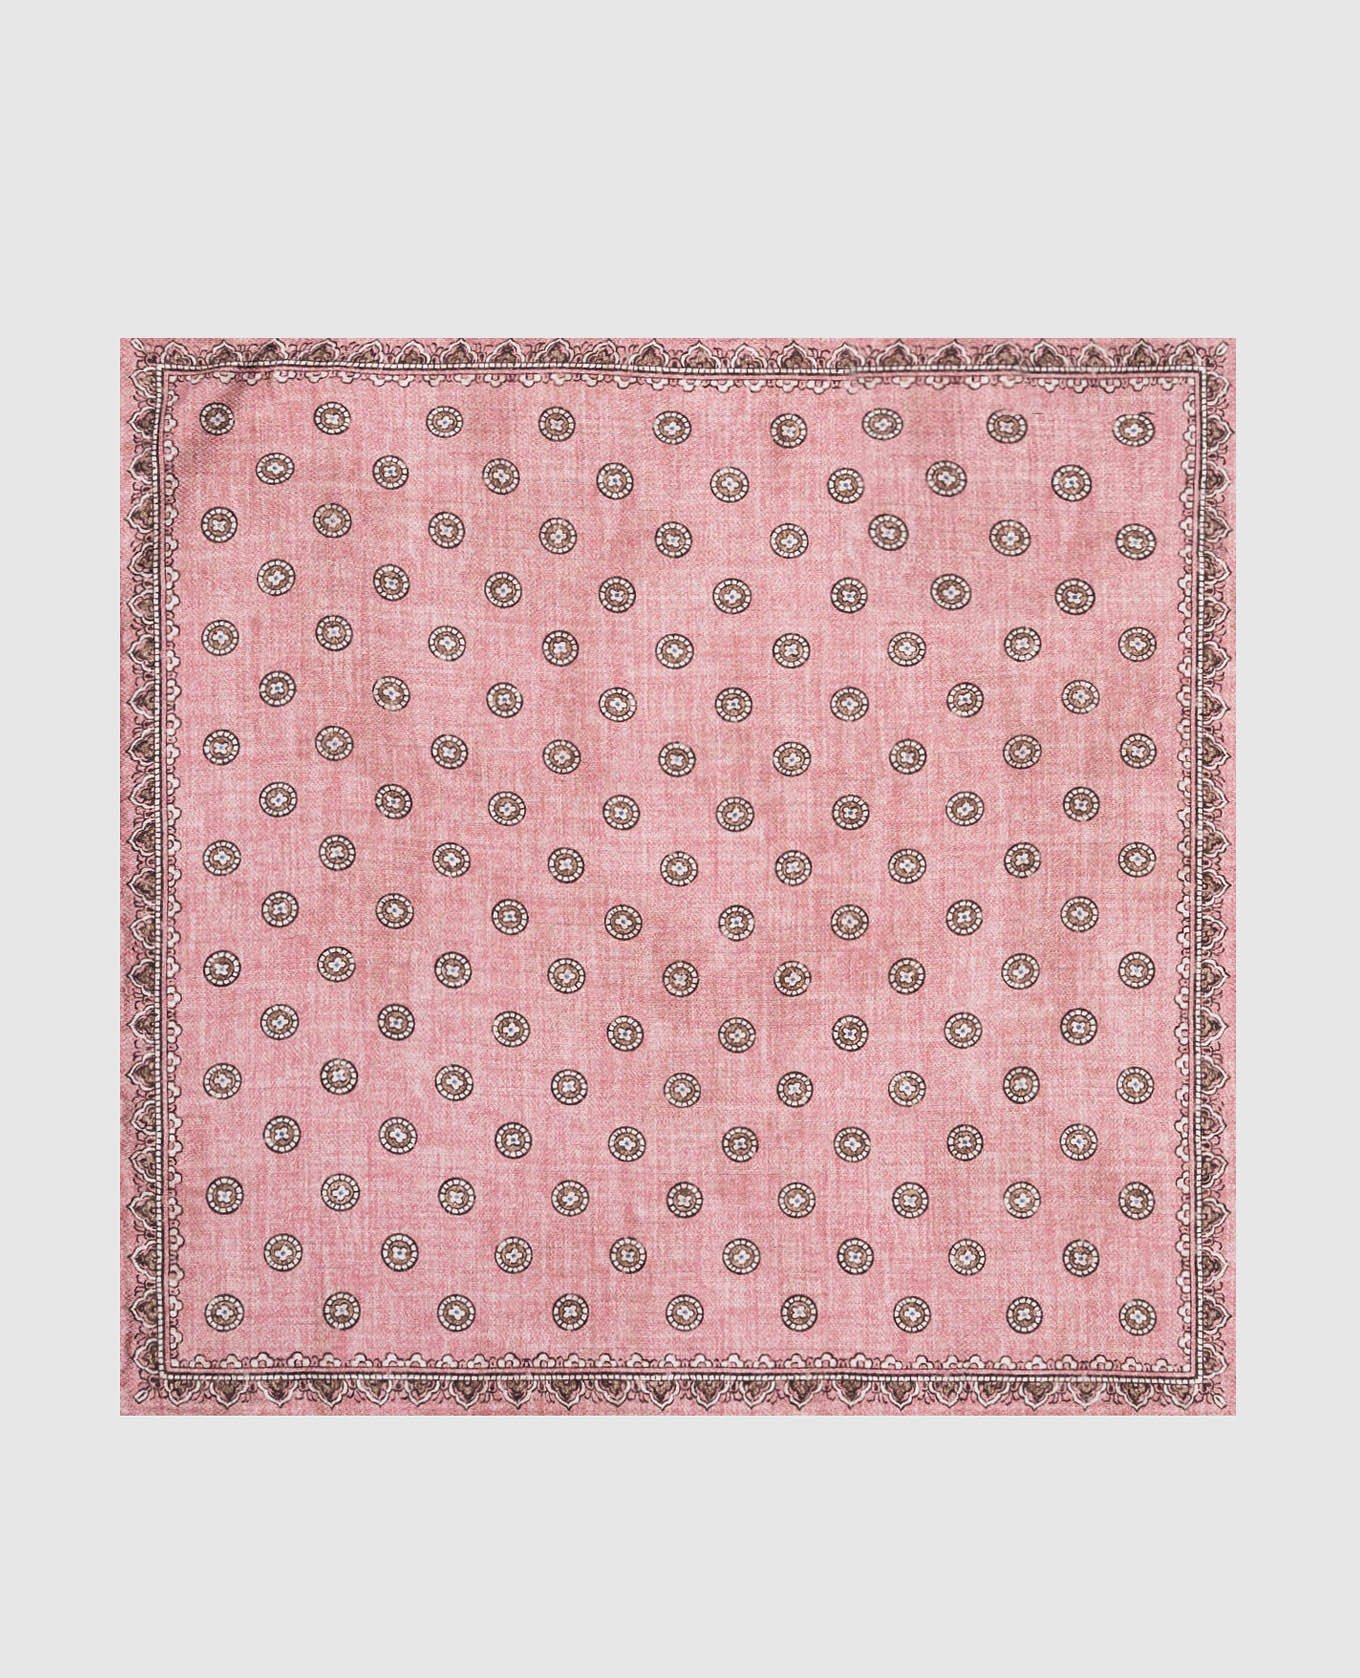 Pink double-sided pache scarf made of silk with a pattern